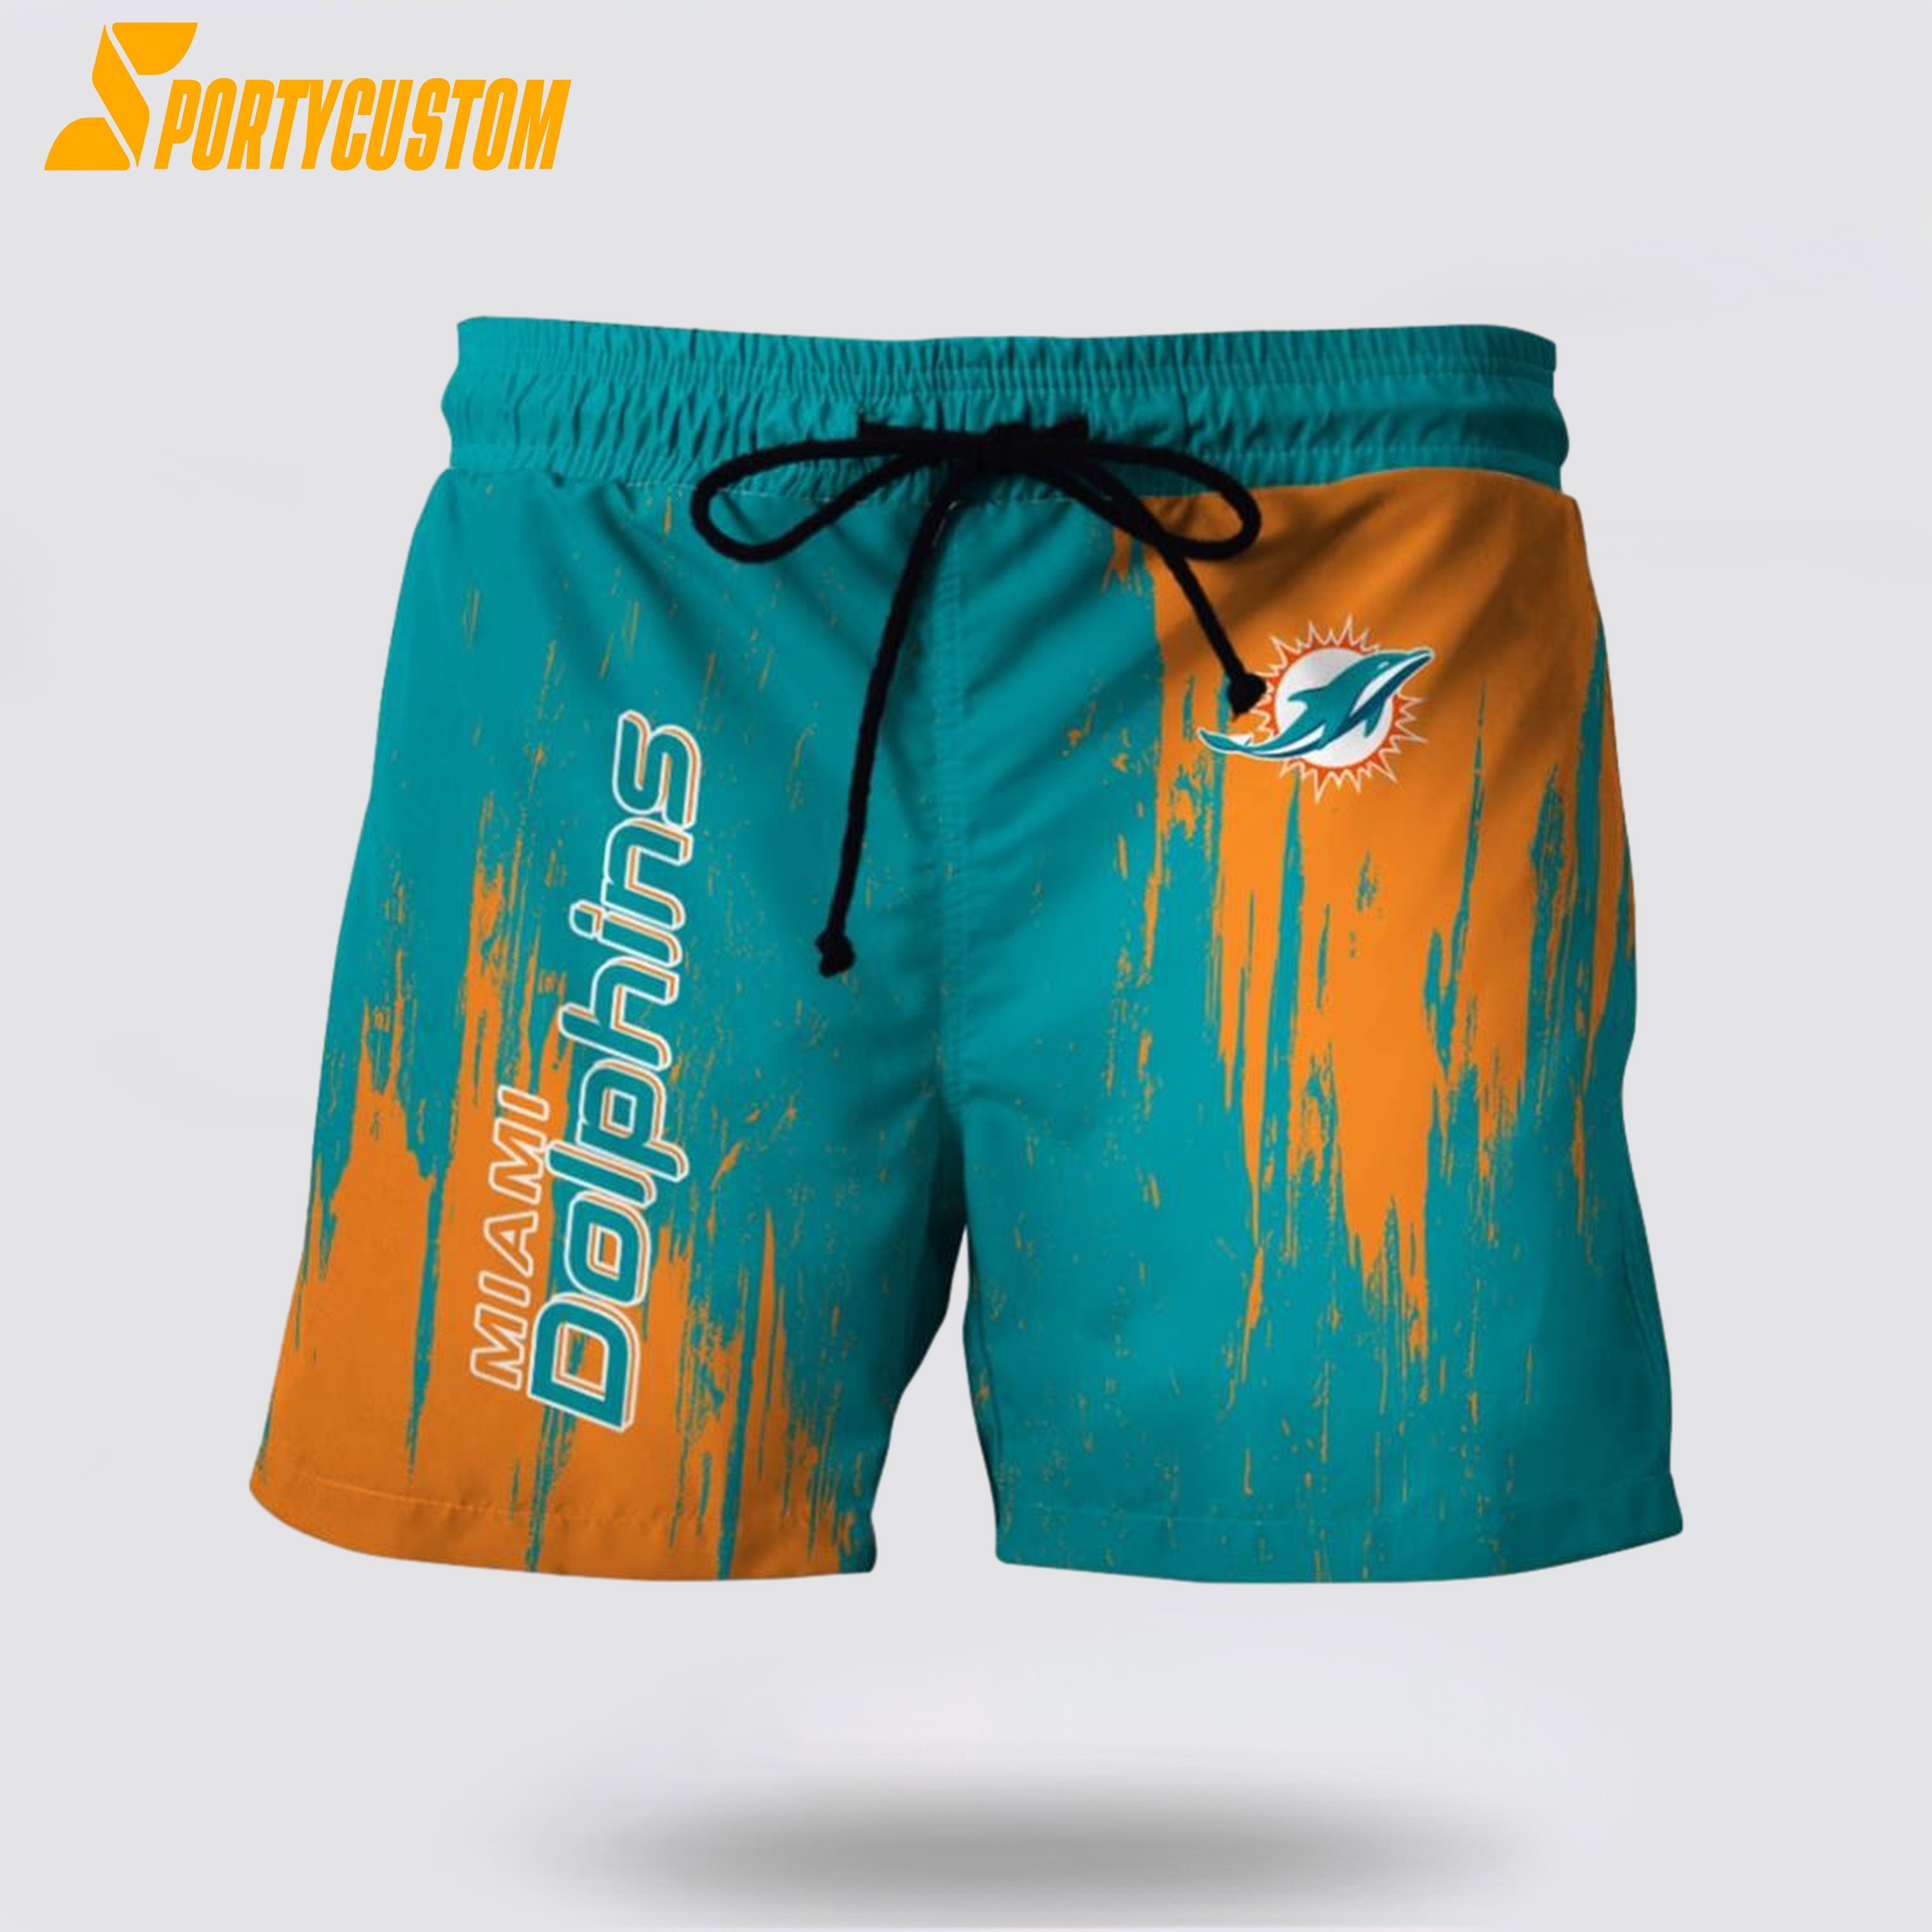 Miami Dolphins Shop - Miami Dolphins Mens Nfl Beach Board Shorts Stand Out With Official Team Spirit